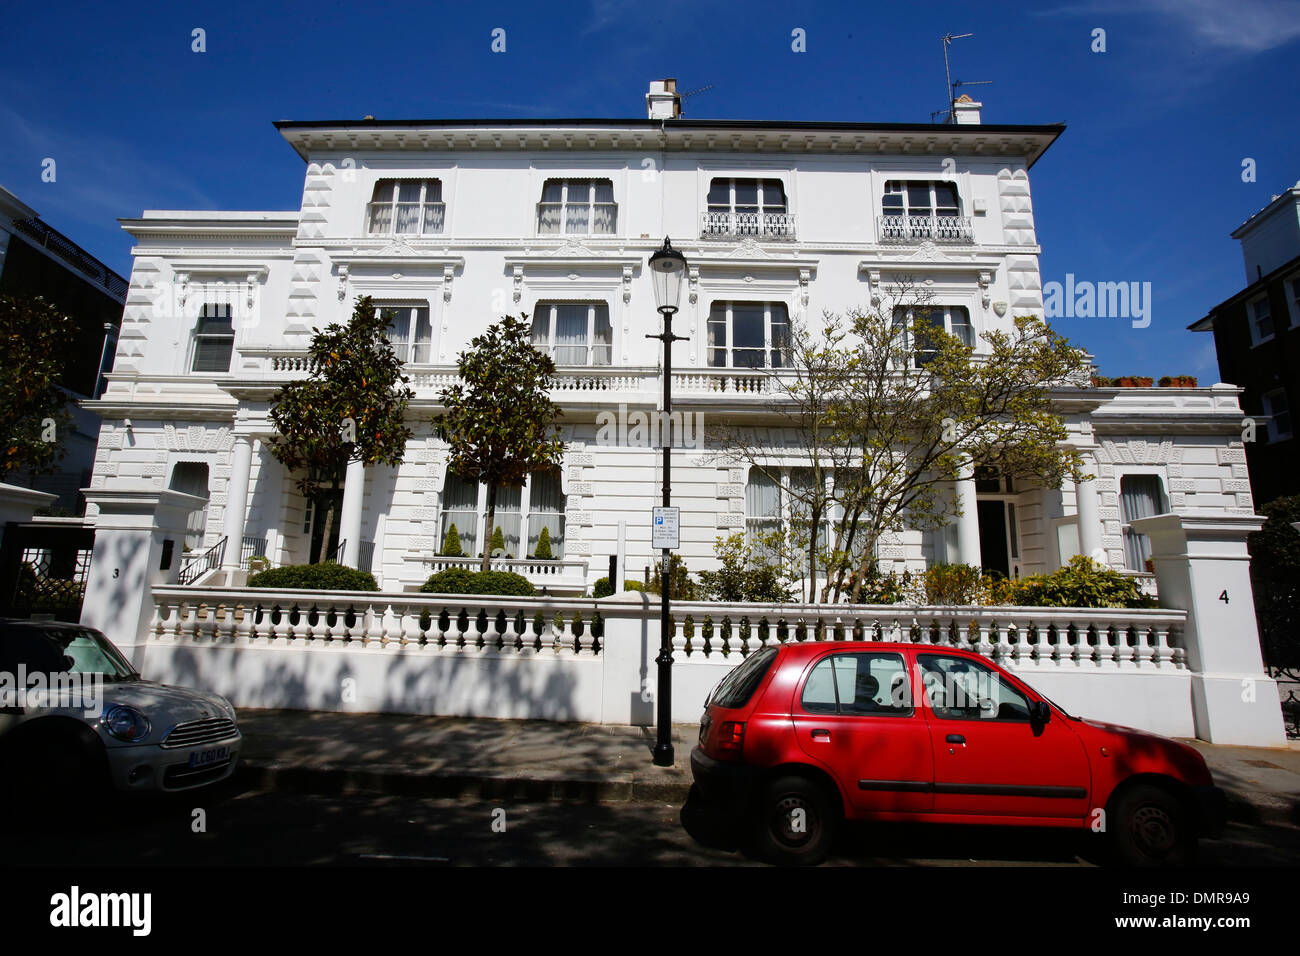 The Boltons Street in South Kensington Chelsea London Stock Photo